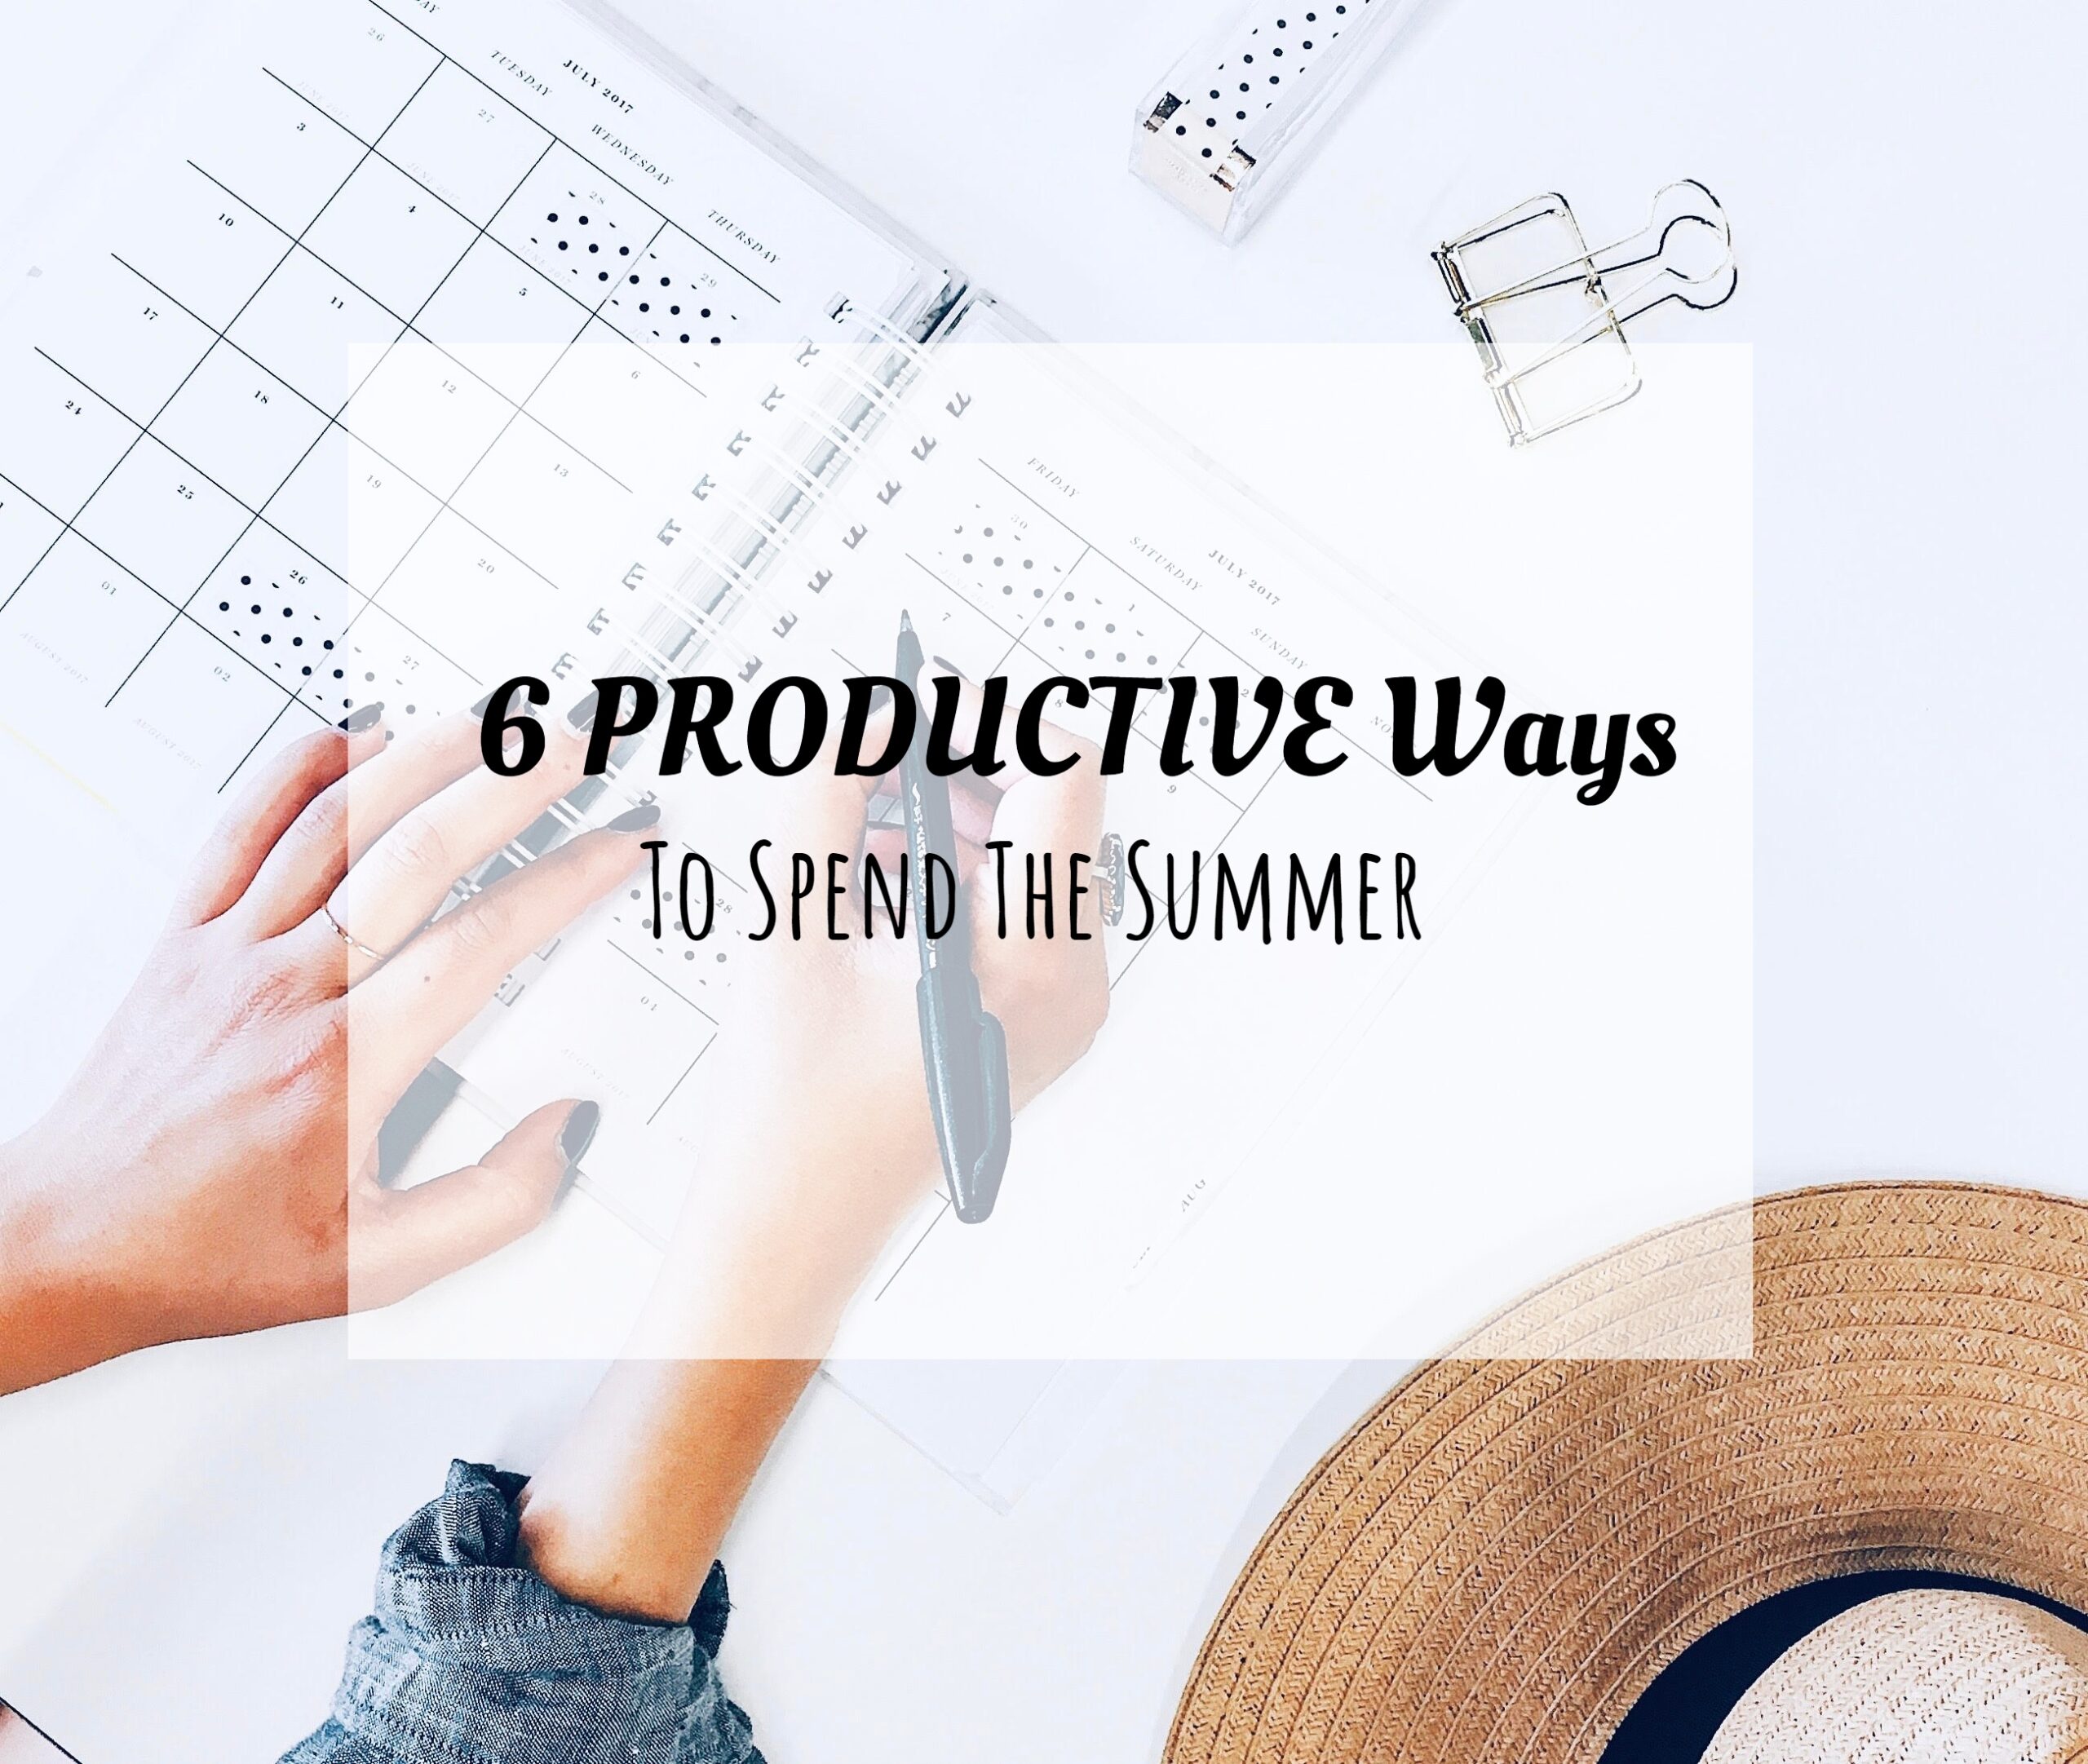 6 Productive Ways to Spend Your Summer